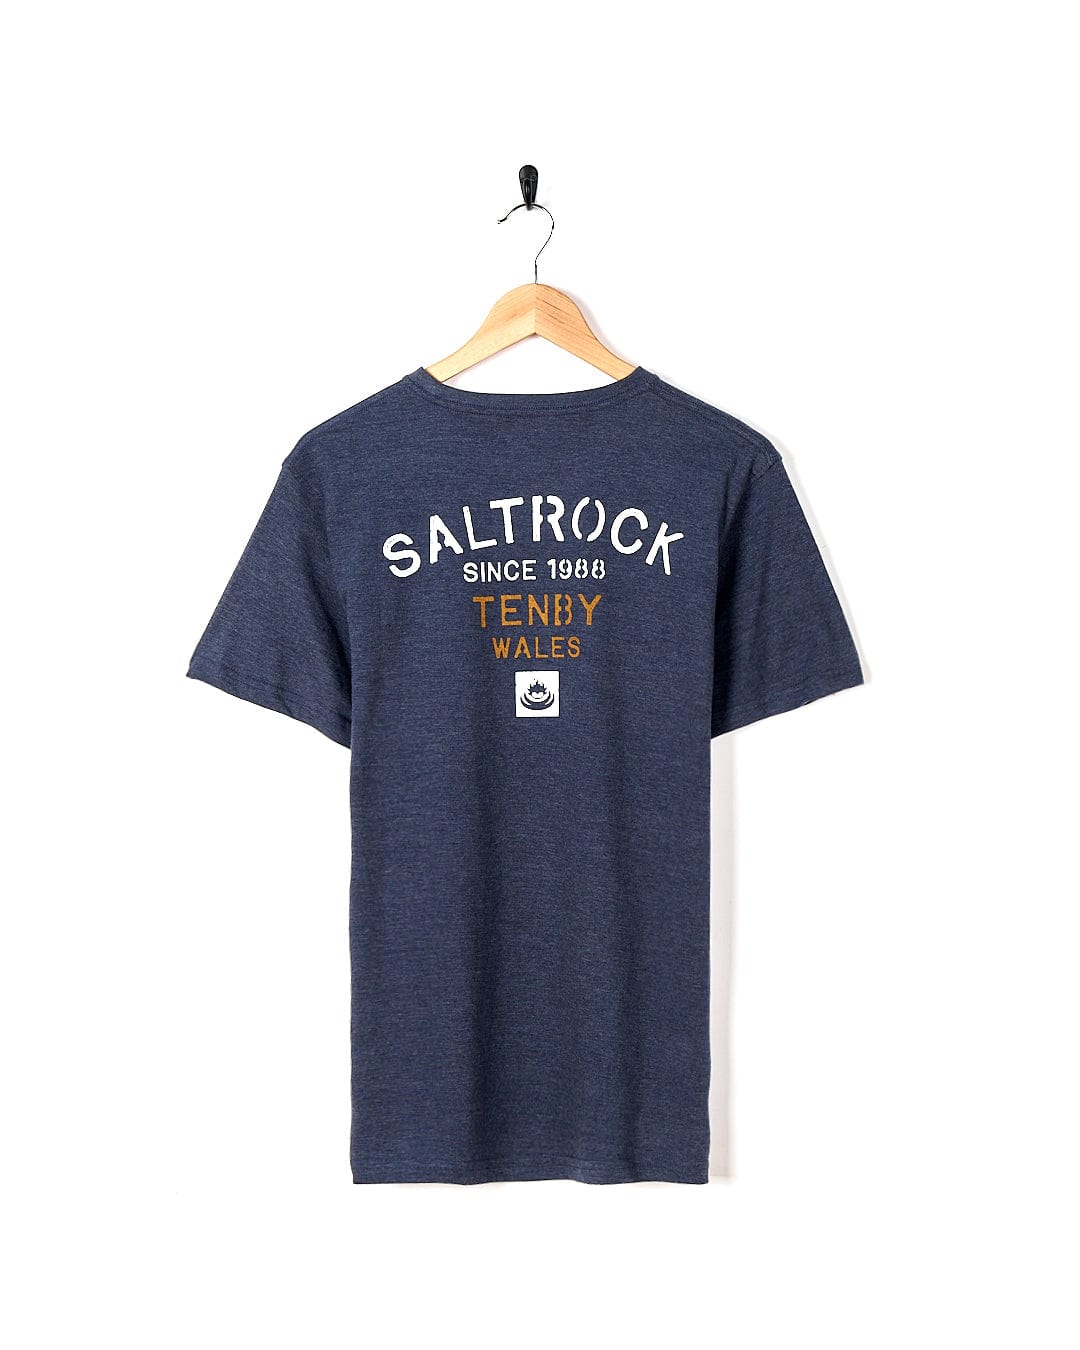 A Stencil - Mens Location T-Shirt - Tenby - Blue with the word Saltrock printed on it.